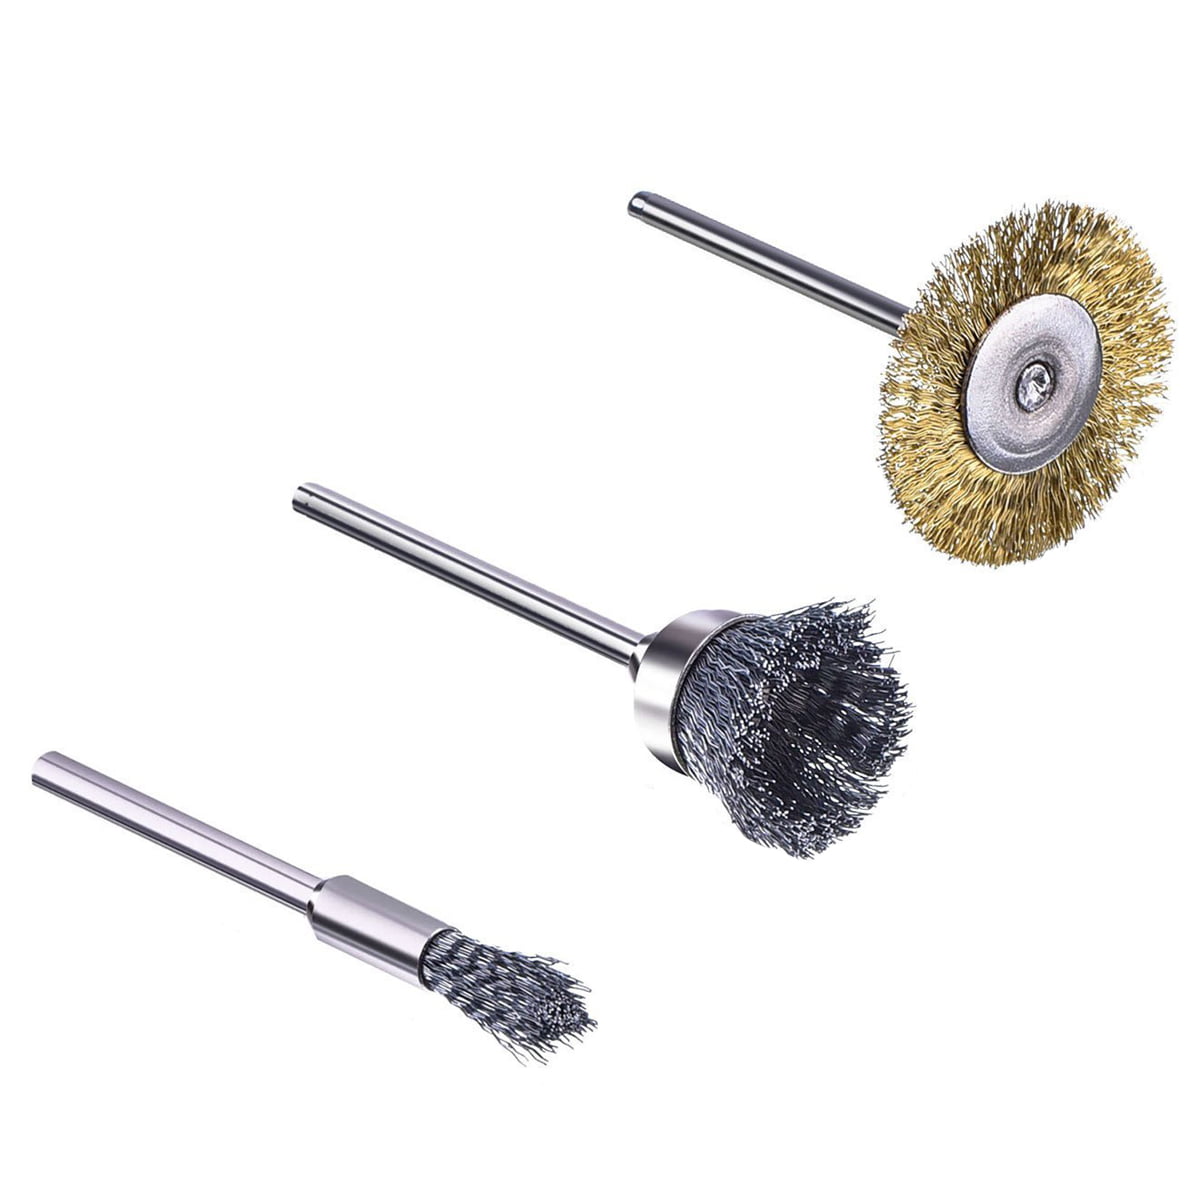 3mm 44 Pieces Mini Wire Brush Wheel Cup Brass Steel Wire Brush Set 1/8inch For